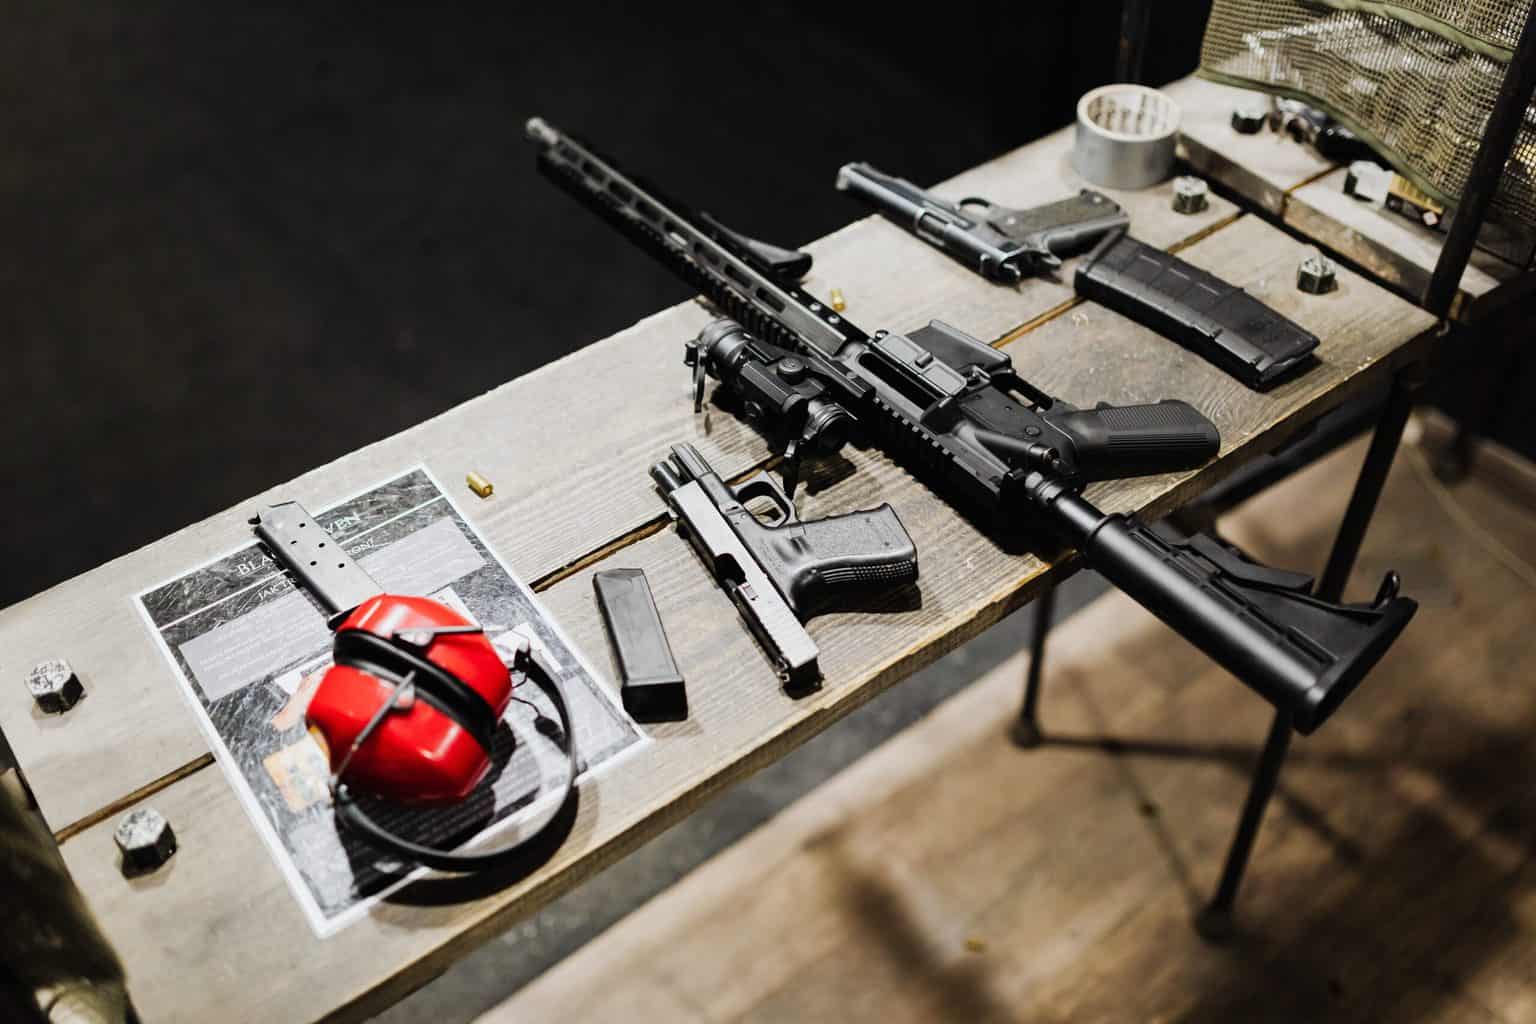 Rifle and gun accessories in a table